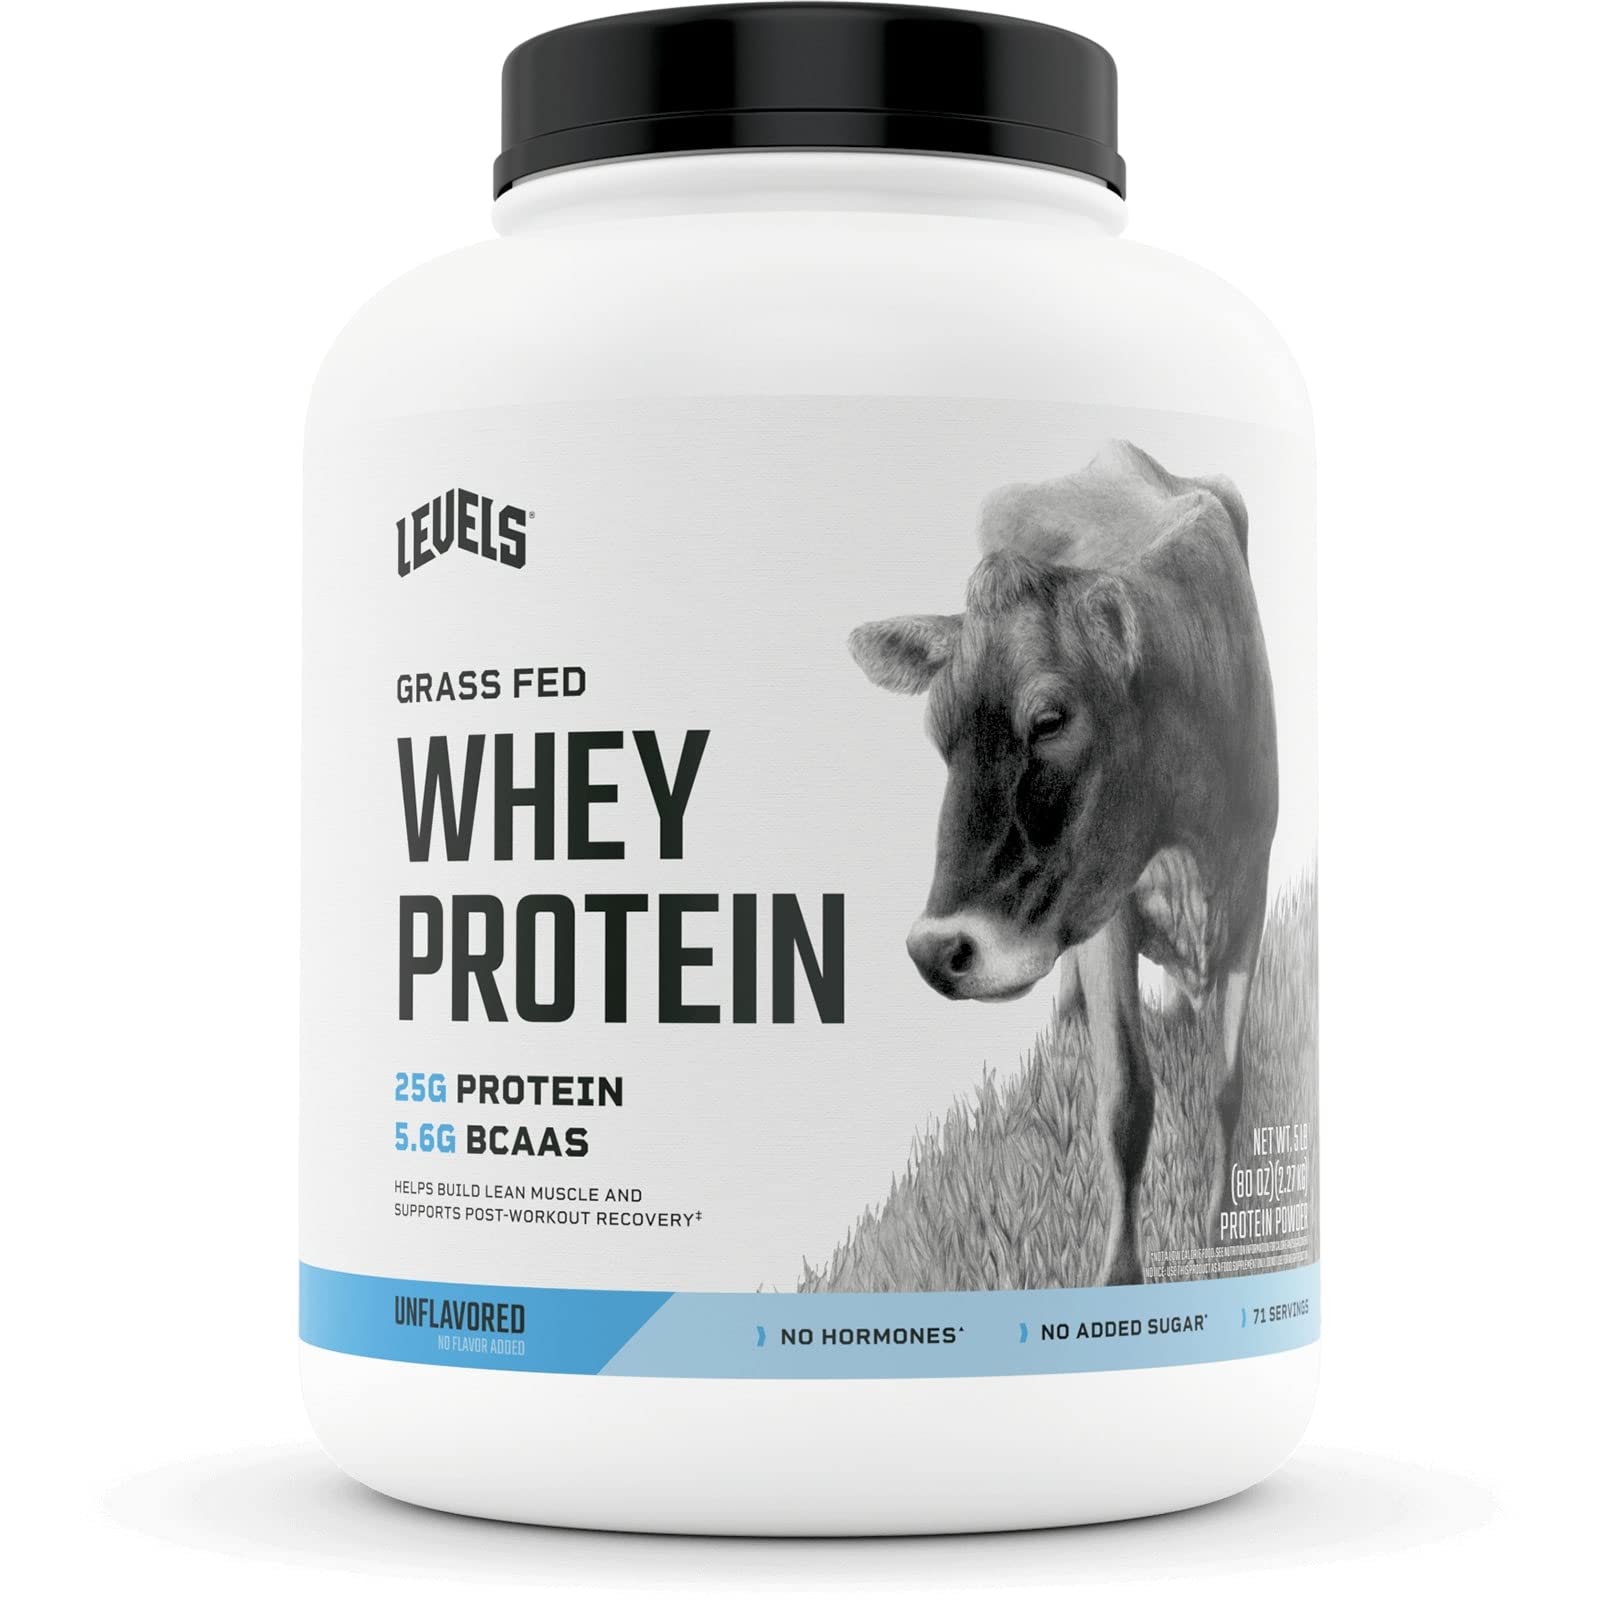 Levels Grass Fed 100% Whey Protein No Hormones Unflavored 5LB